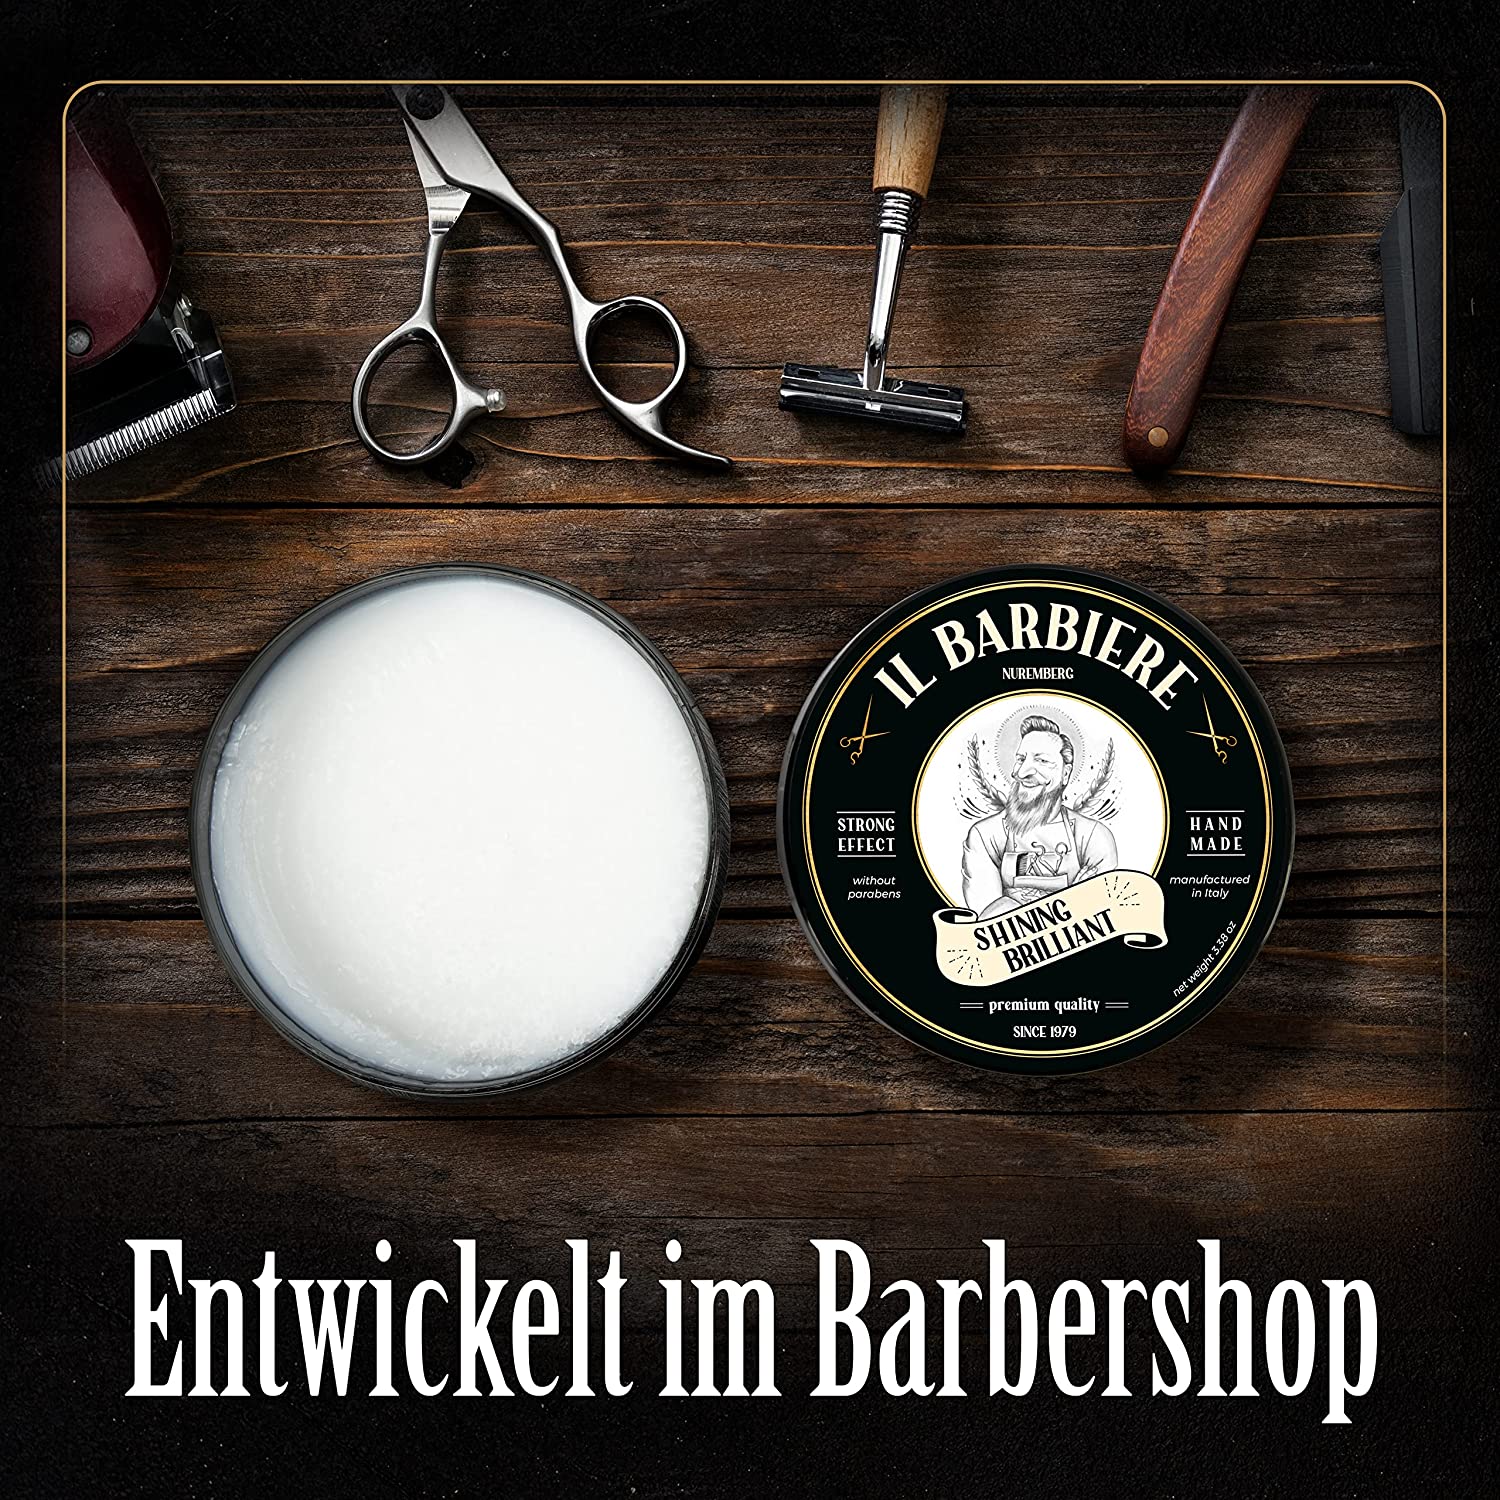 barbiere Il Barbiere® Shining Brilliant Pomade Water-Based - Shiny Hair Wax, Flexible Hold, Pomade Men, Hair Wax Men - No Parabens, Silicone-Free - Handmade for a Unique Look, 100 ml, ‎shining